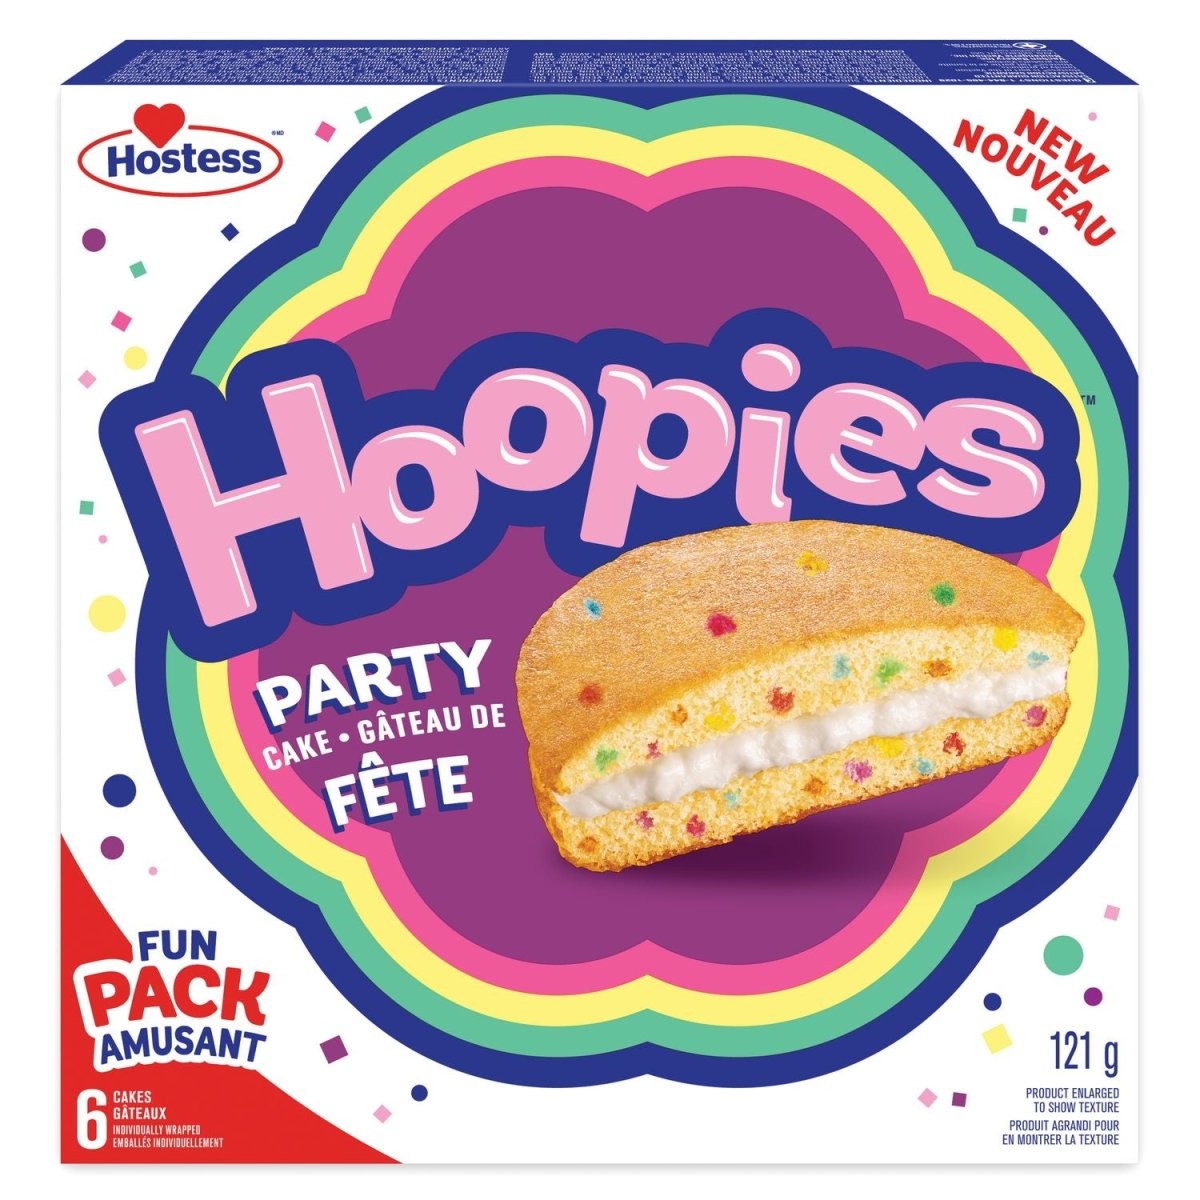 Hostess Hoopies Party (Canada) 121g - Candy Mail UK